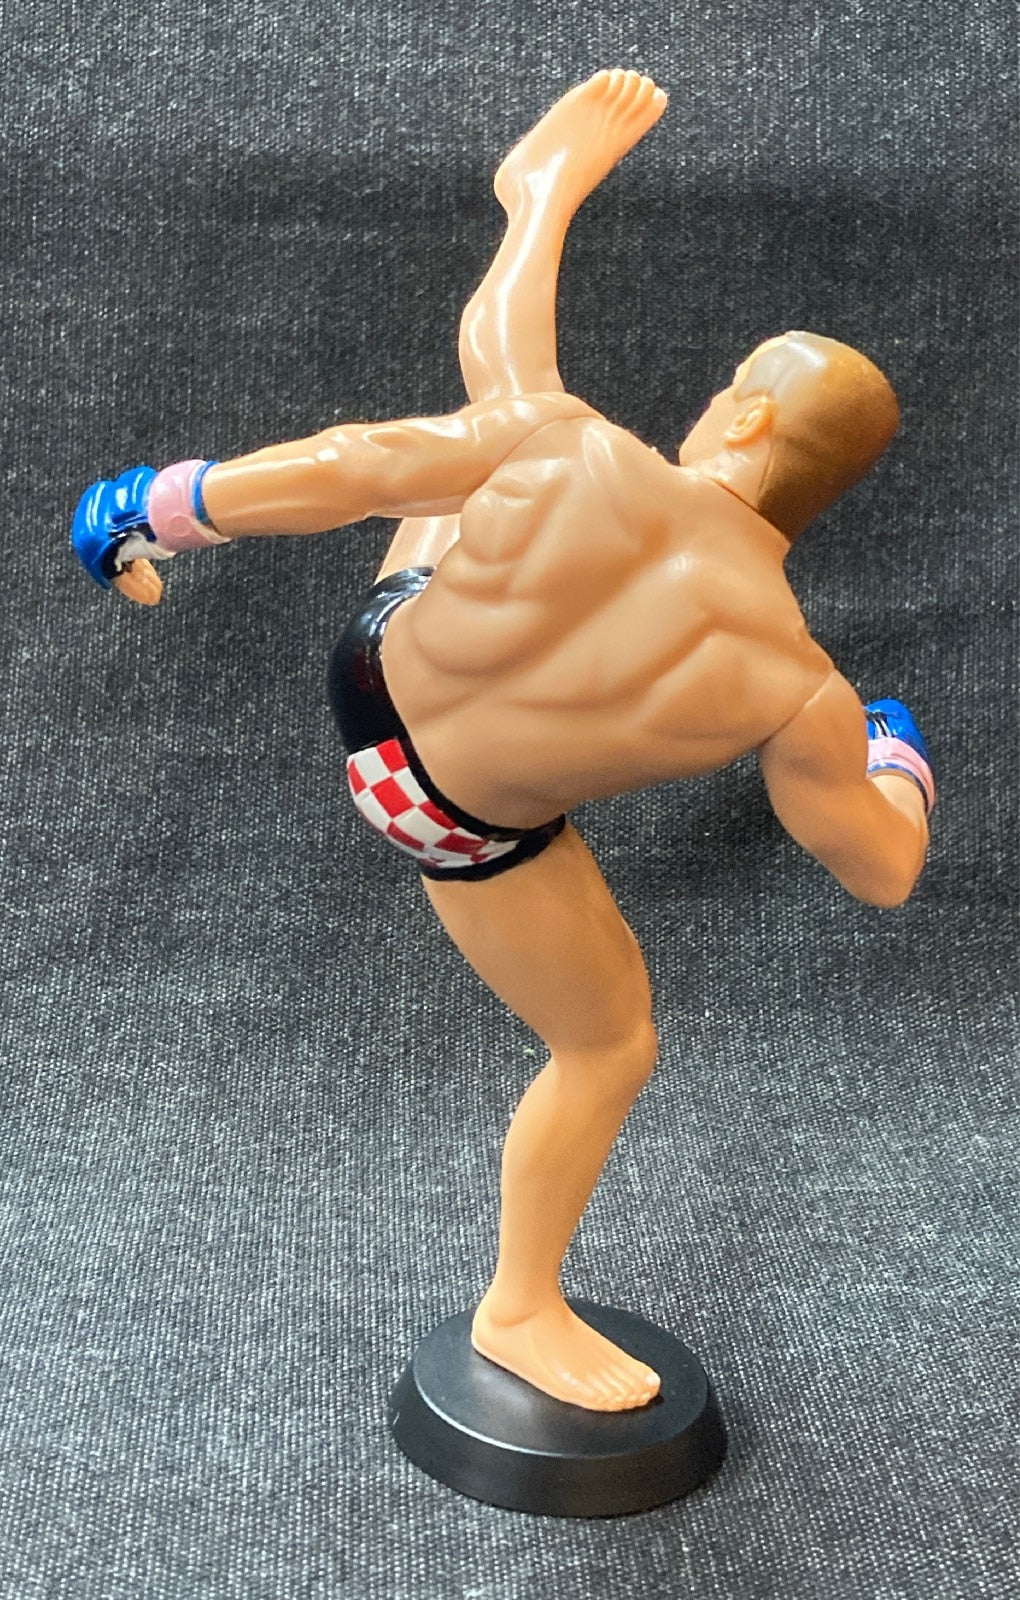 2004 Dream Stage HAO Collection Officially Licensed Wrestlers & Fighters Statues Mirko Cro Cop